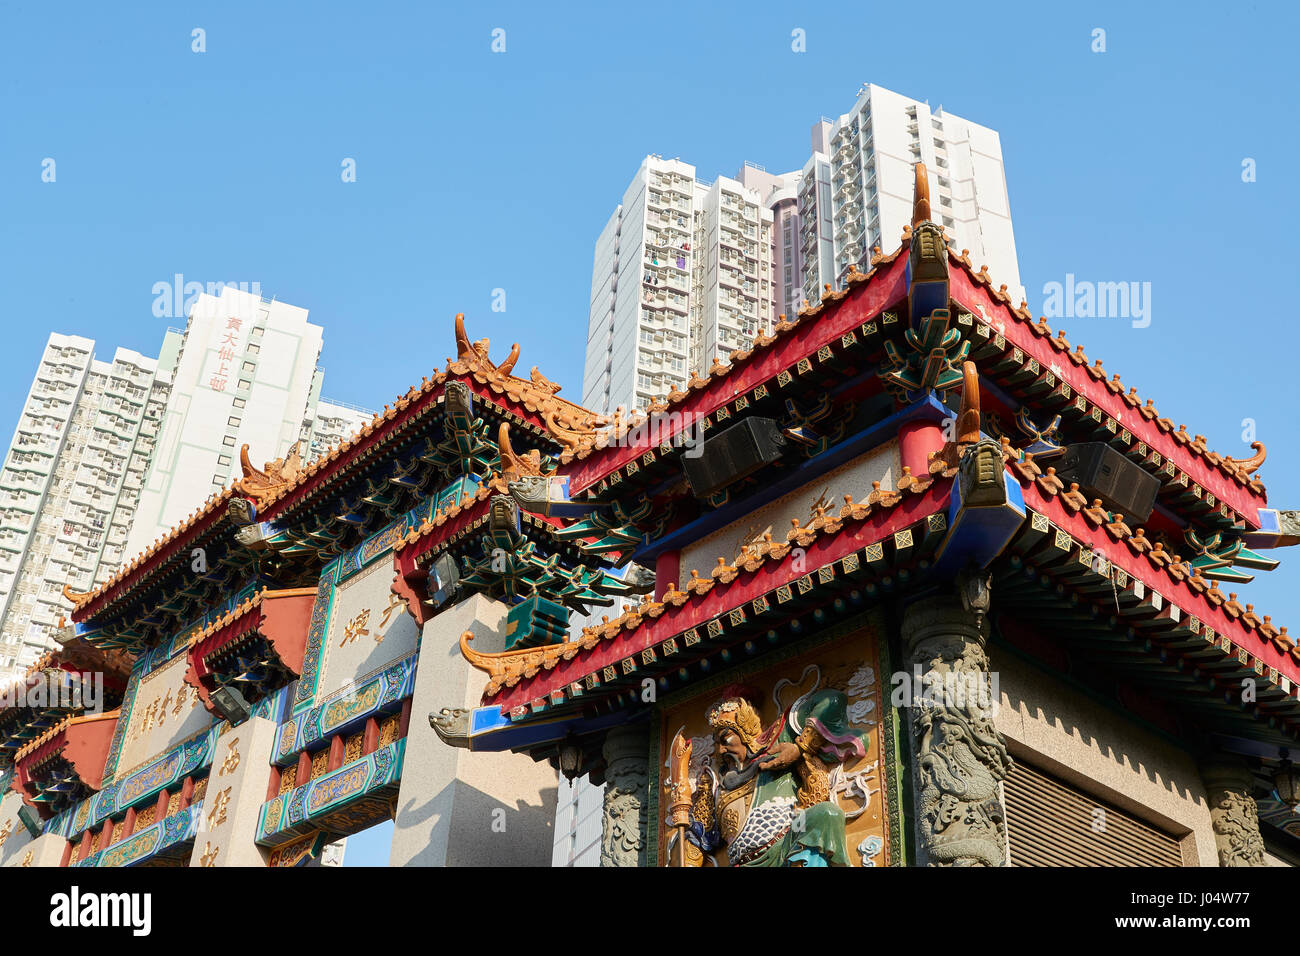 Ornate Traditional Chinese Architecture Contrasts With The Hong Kong Skyline At The Wong Tai Sin Temple, Hong Kong. Stock Photo